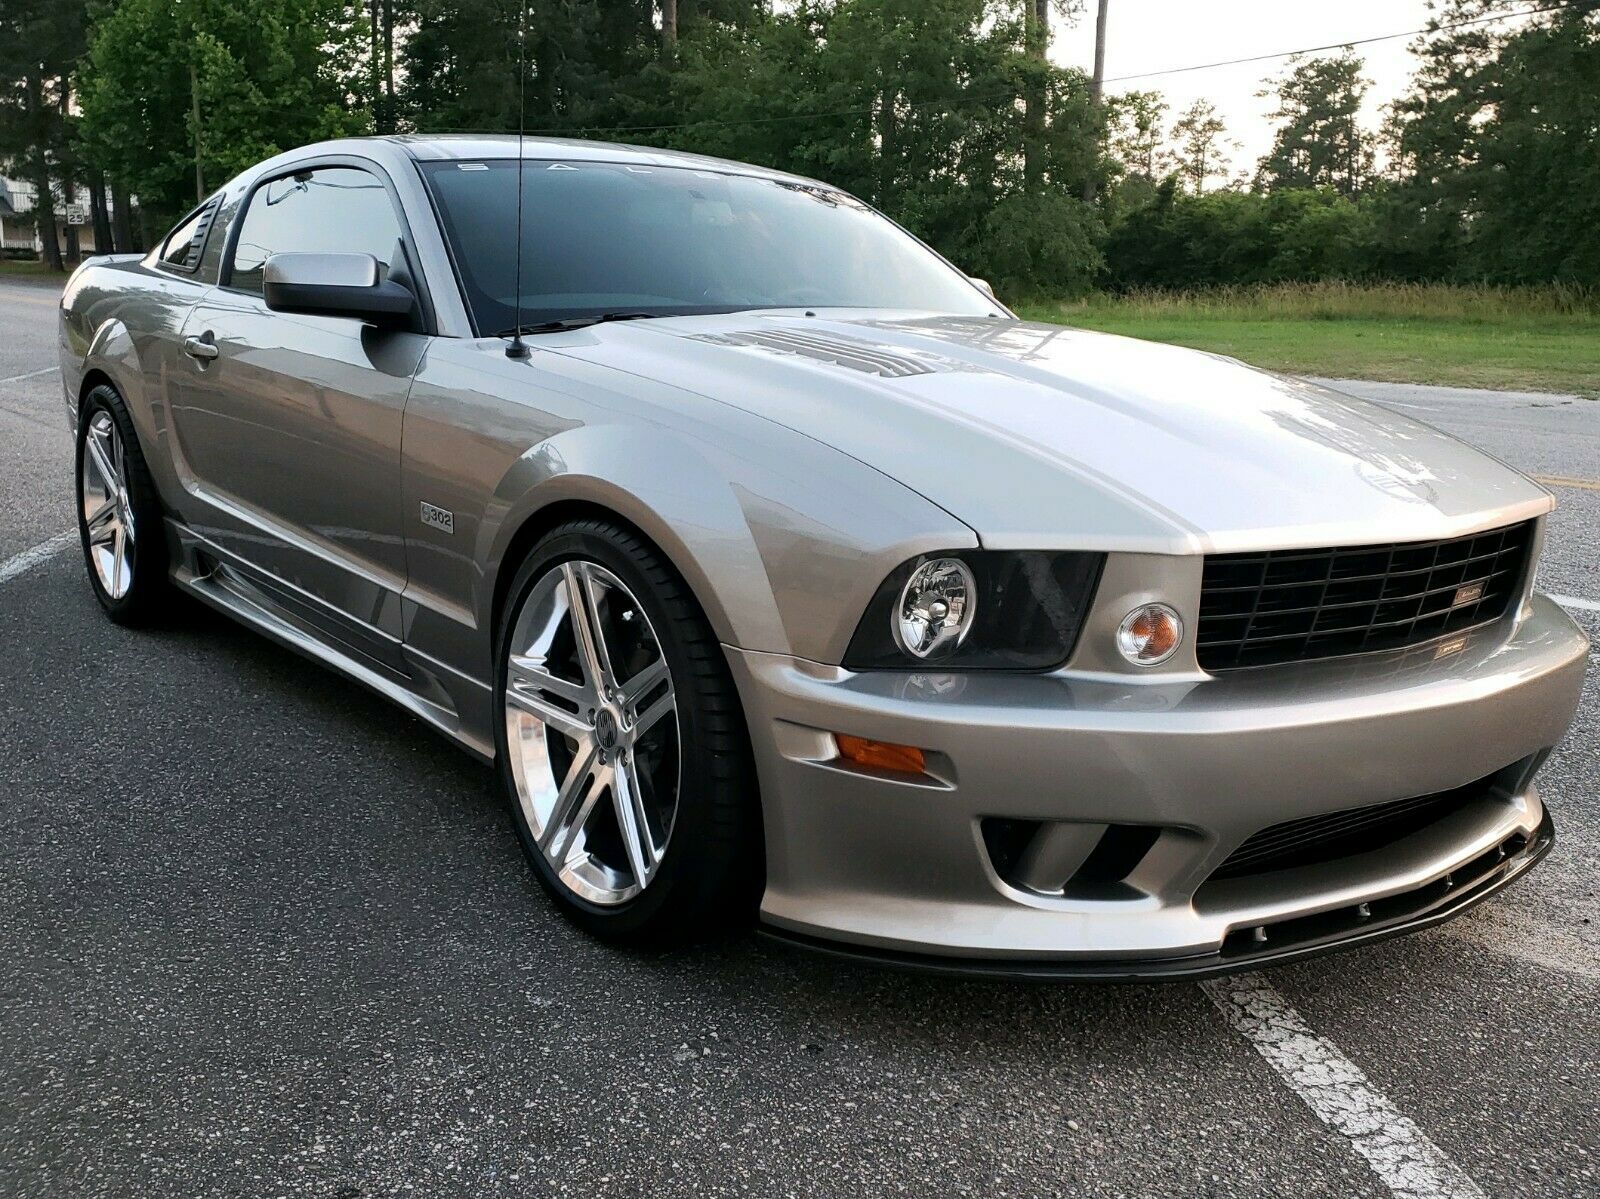 Mustang Of The Day: 2008 Saleen SA-25 Sterling Edition Mustang